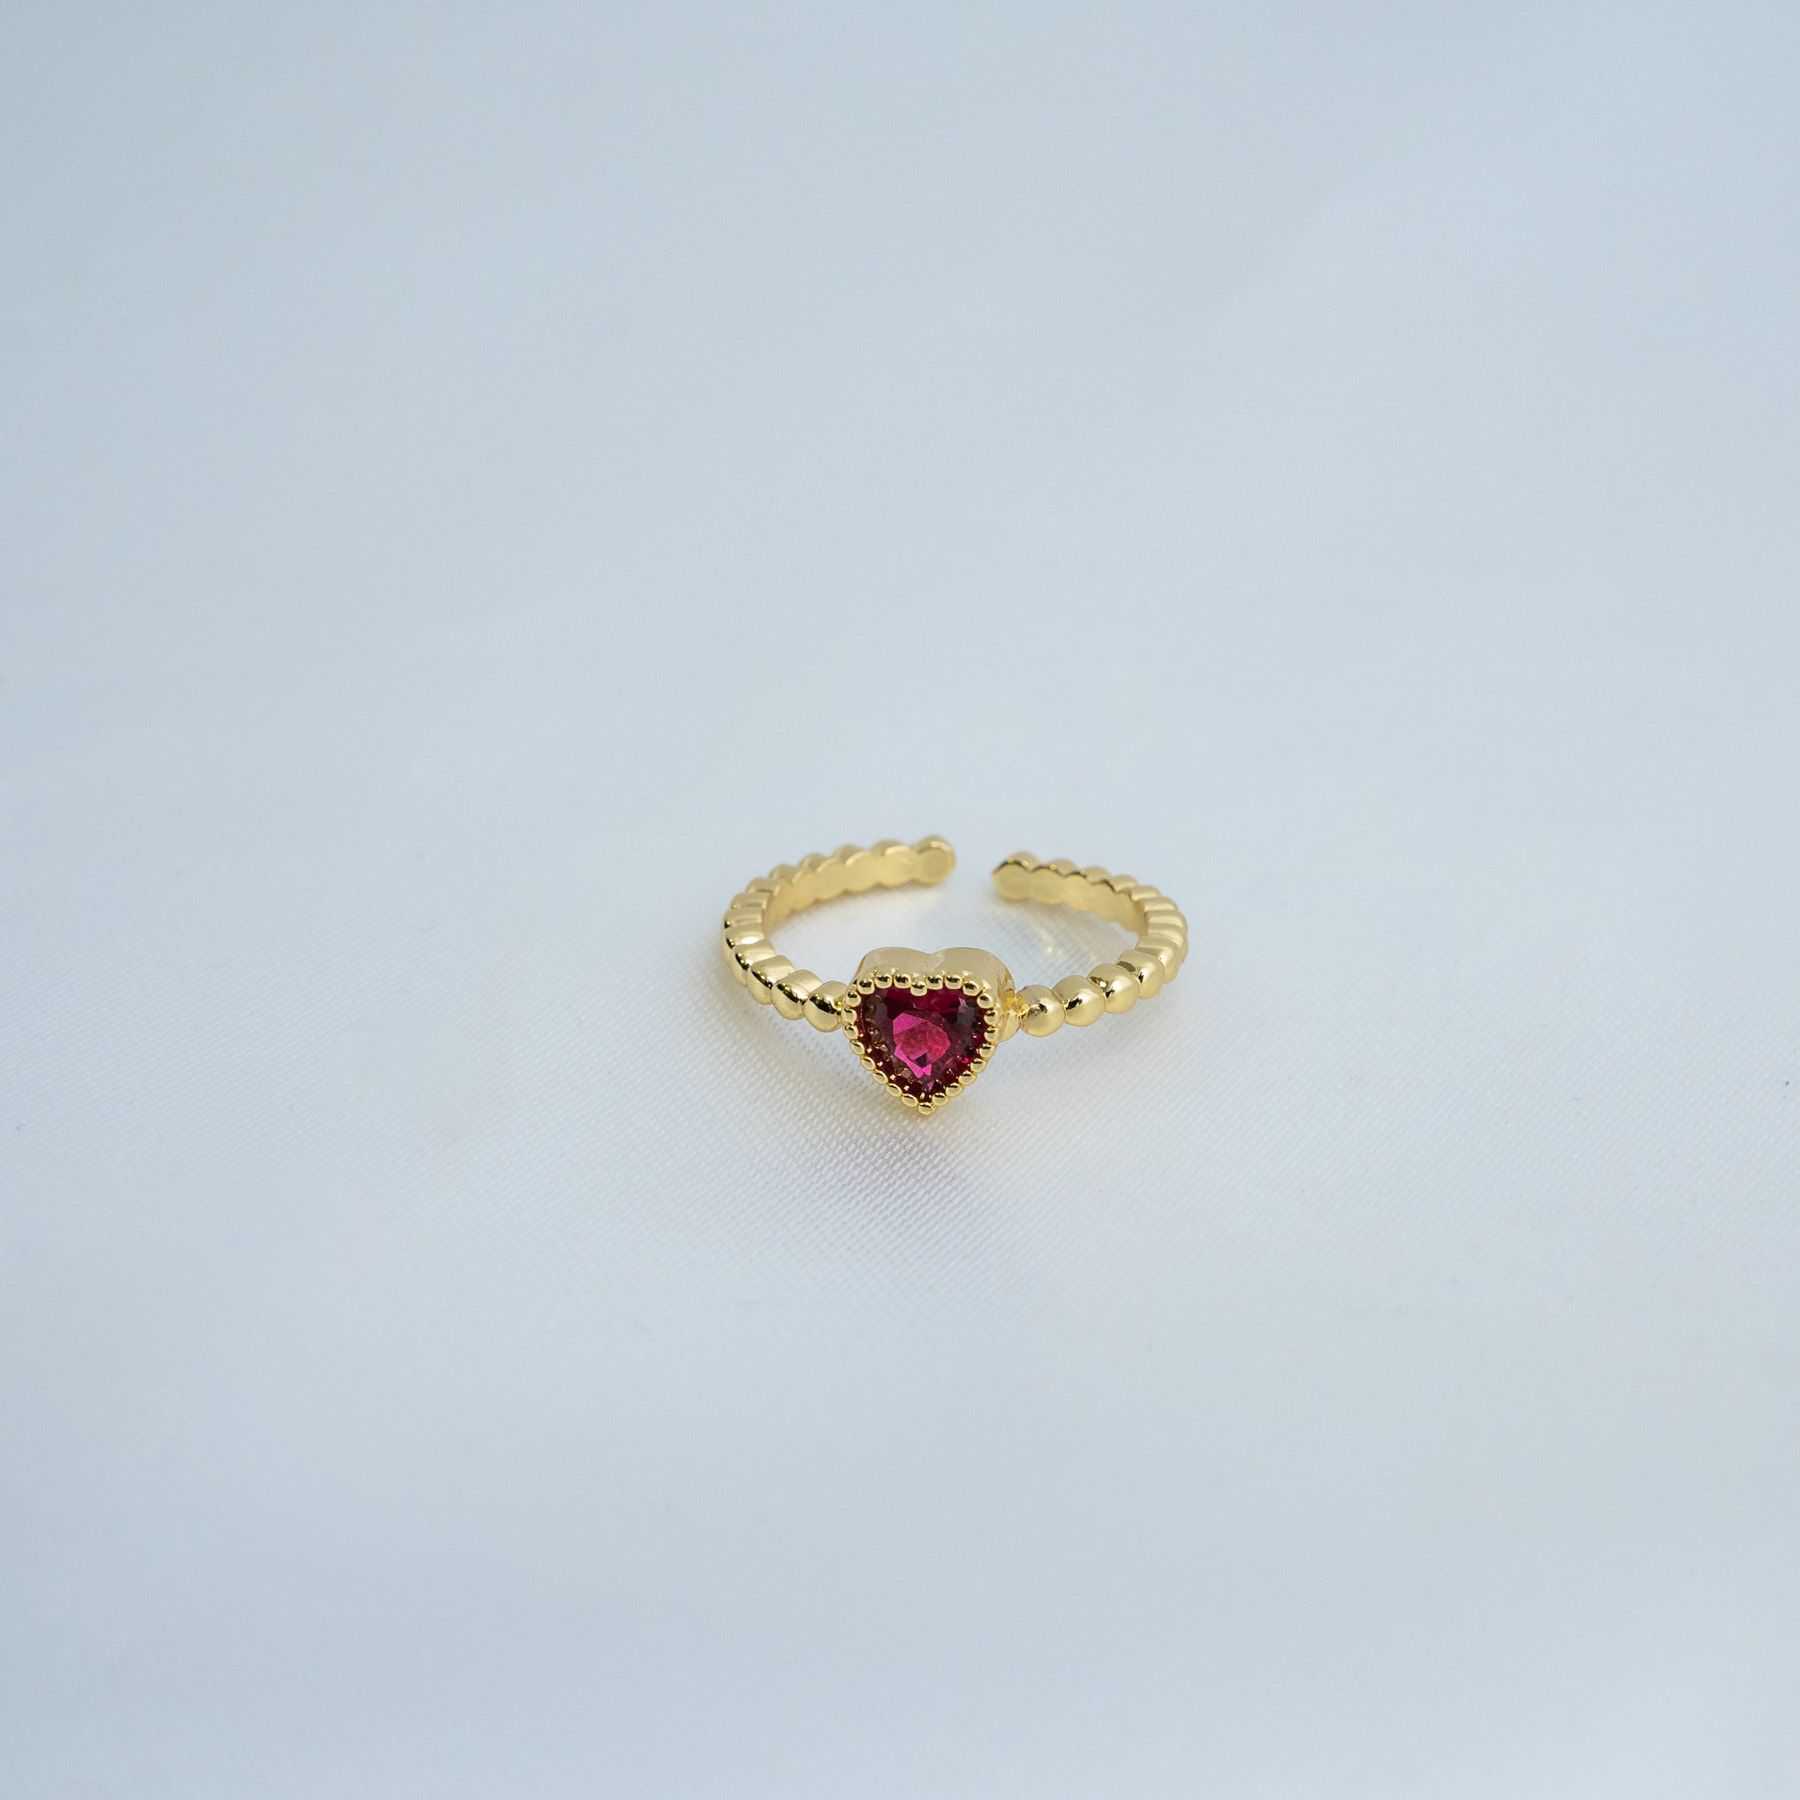 KISS ME RING - GOLD & RED